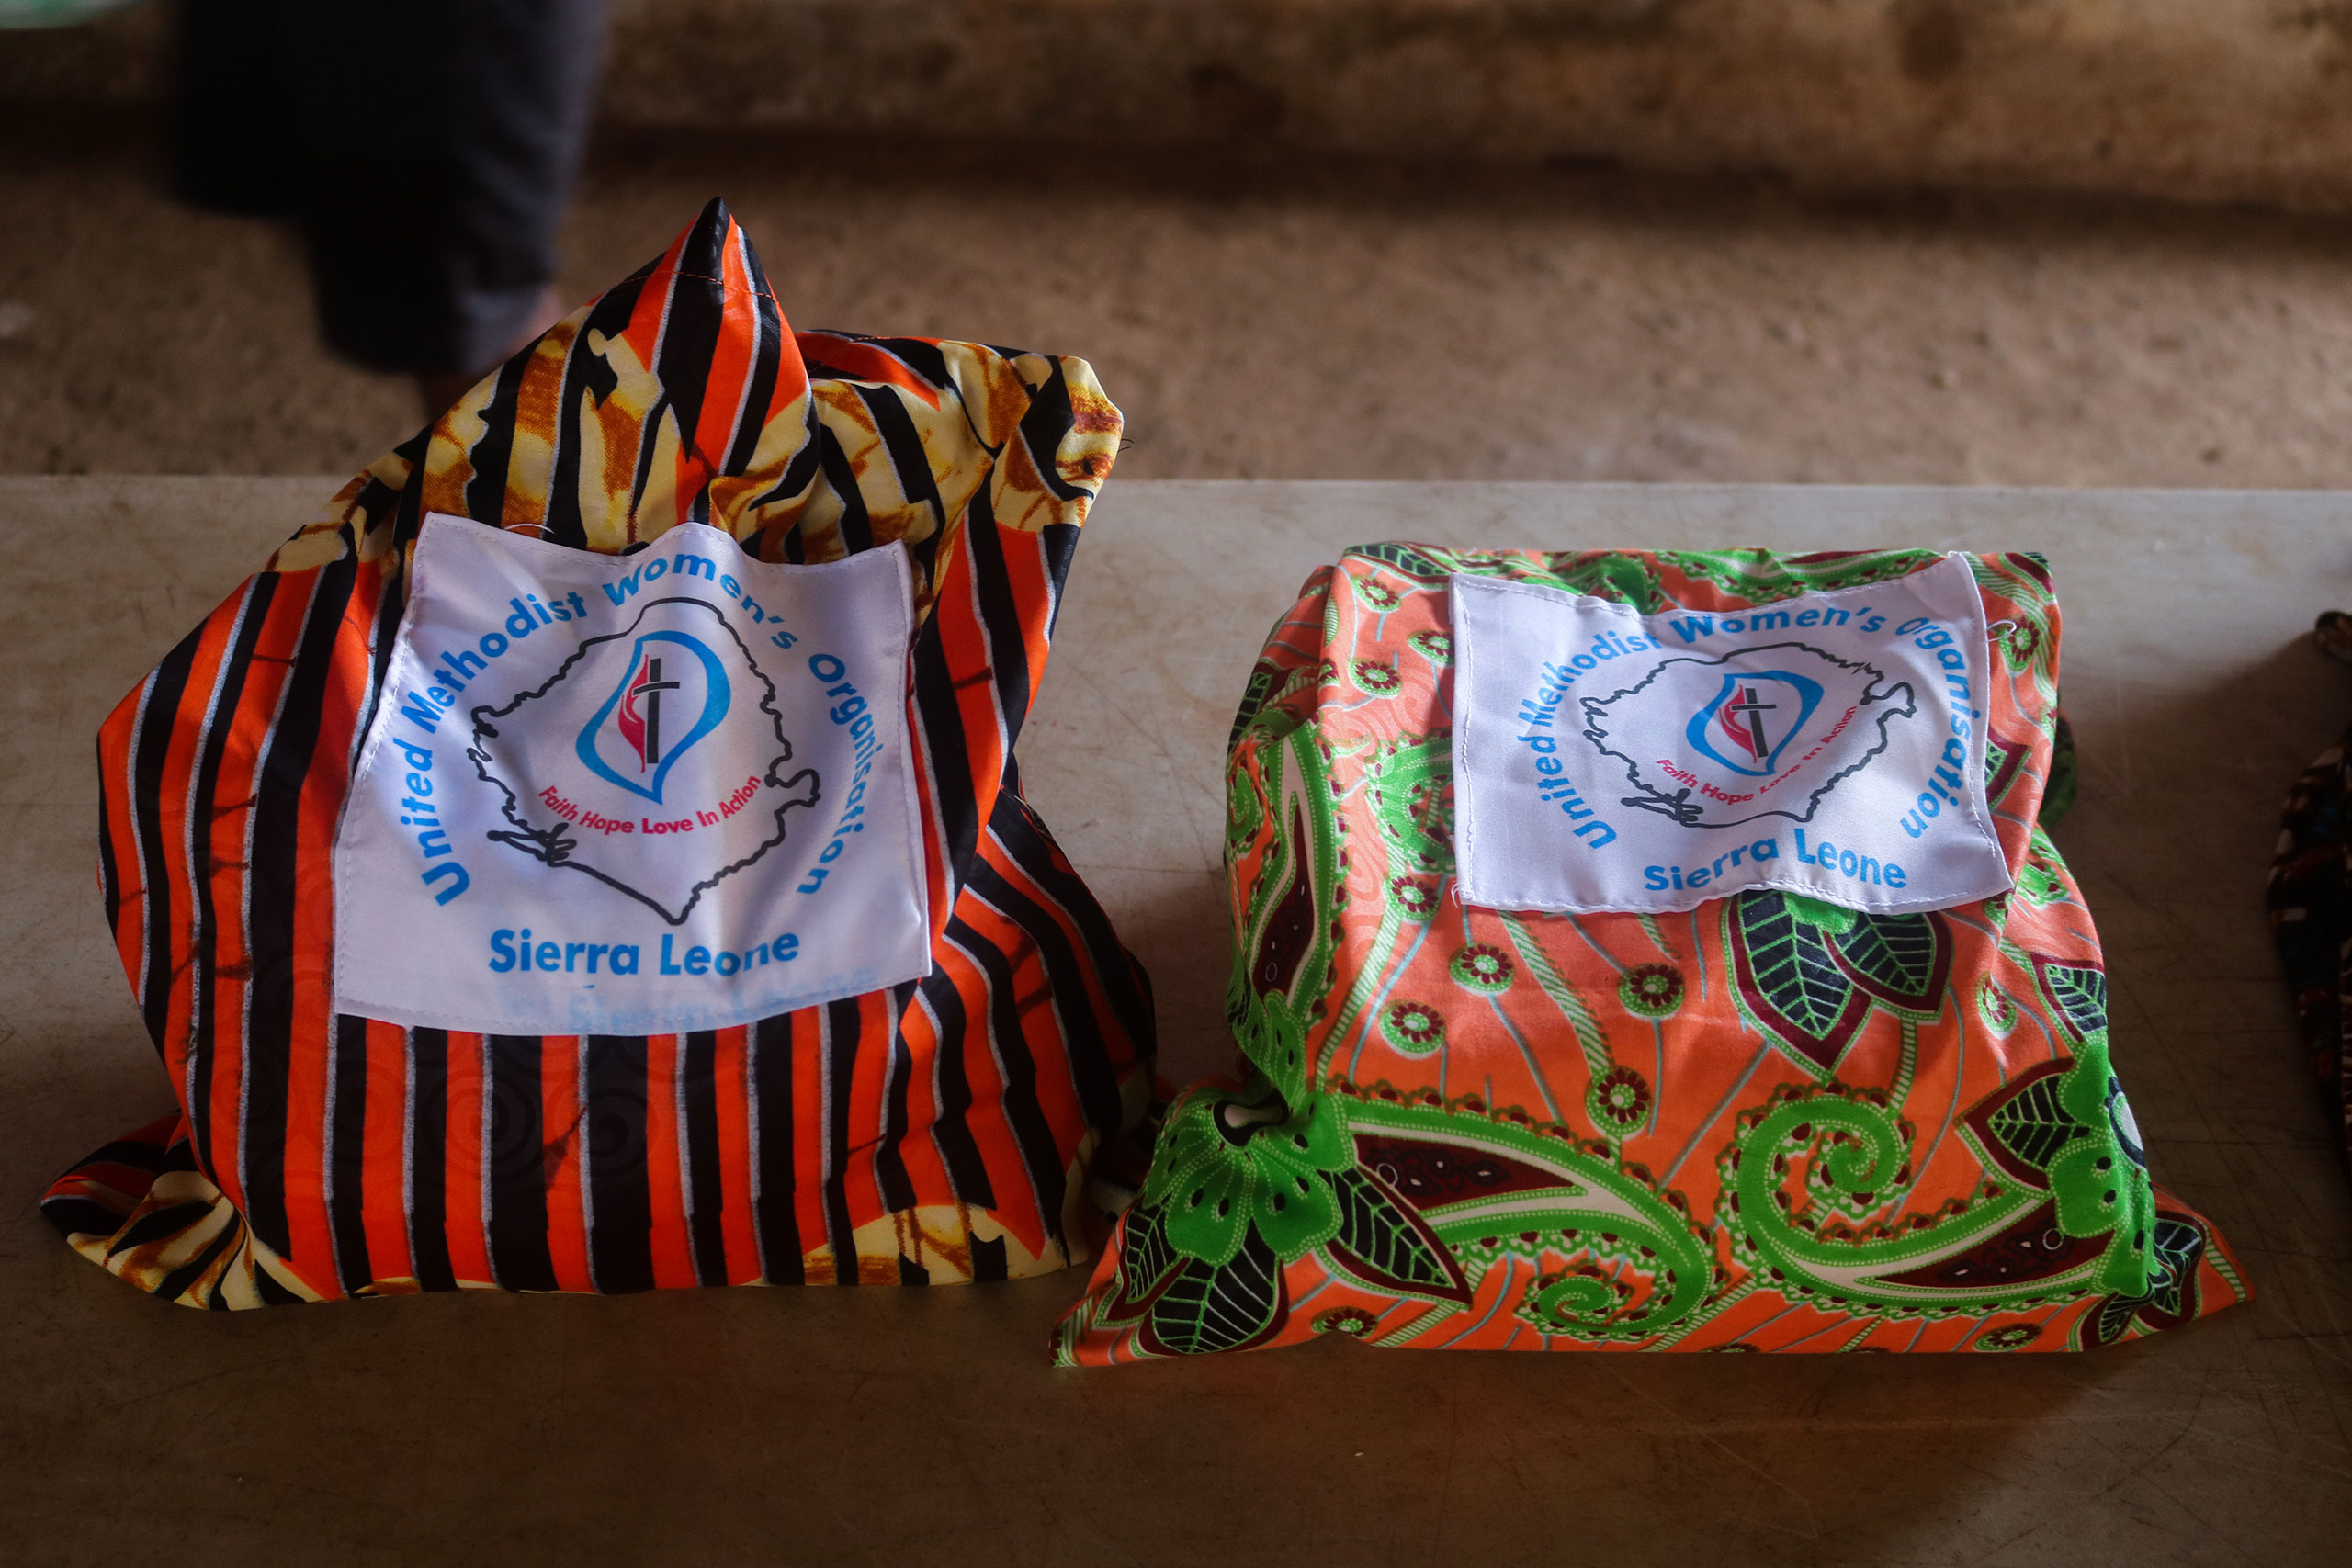 Covid aid parcels from the United Methodist Women Sierra Leone country team